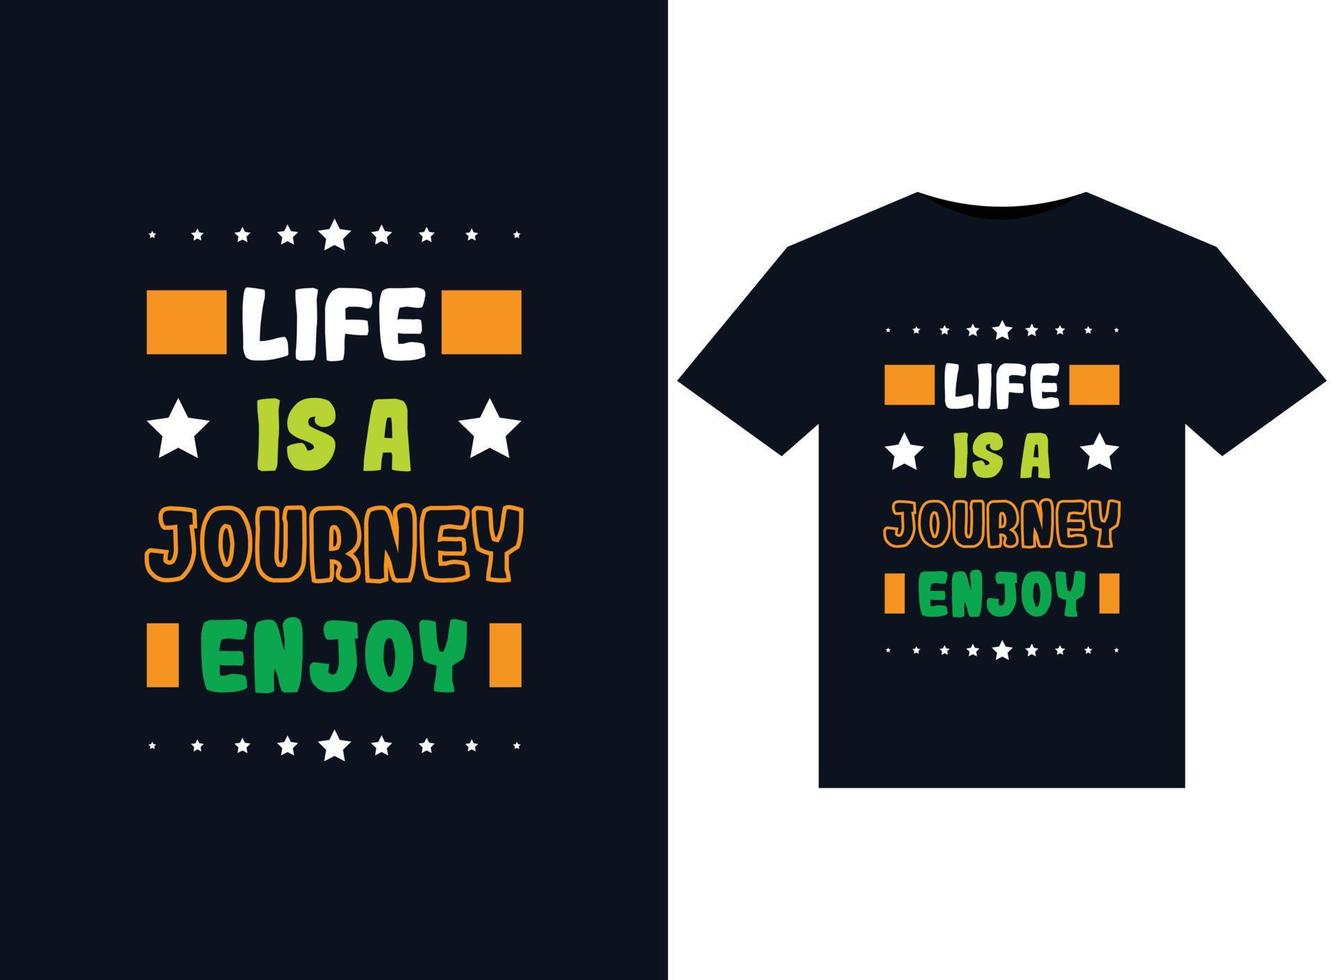 life is a journey enjoy illustrations for print-ready T-Shirts design vector